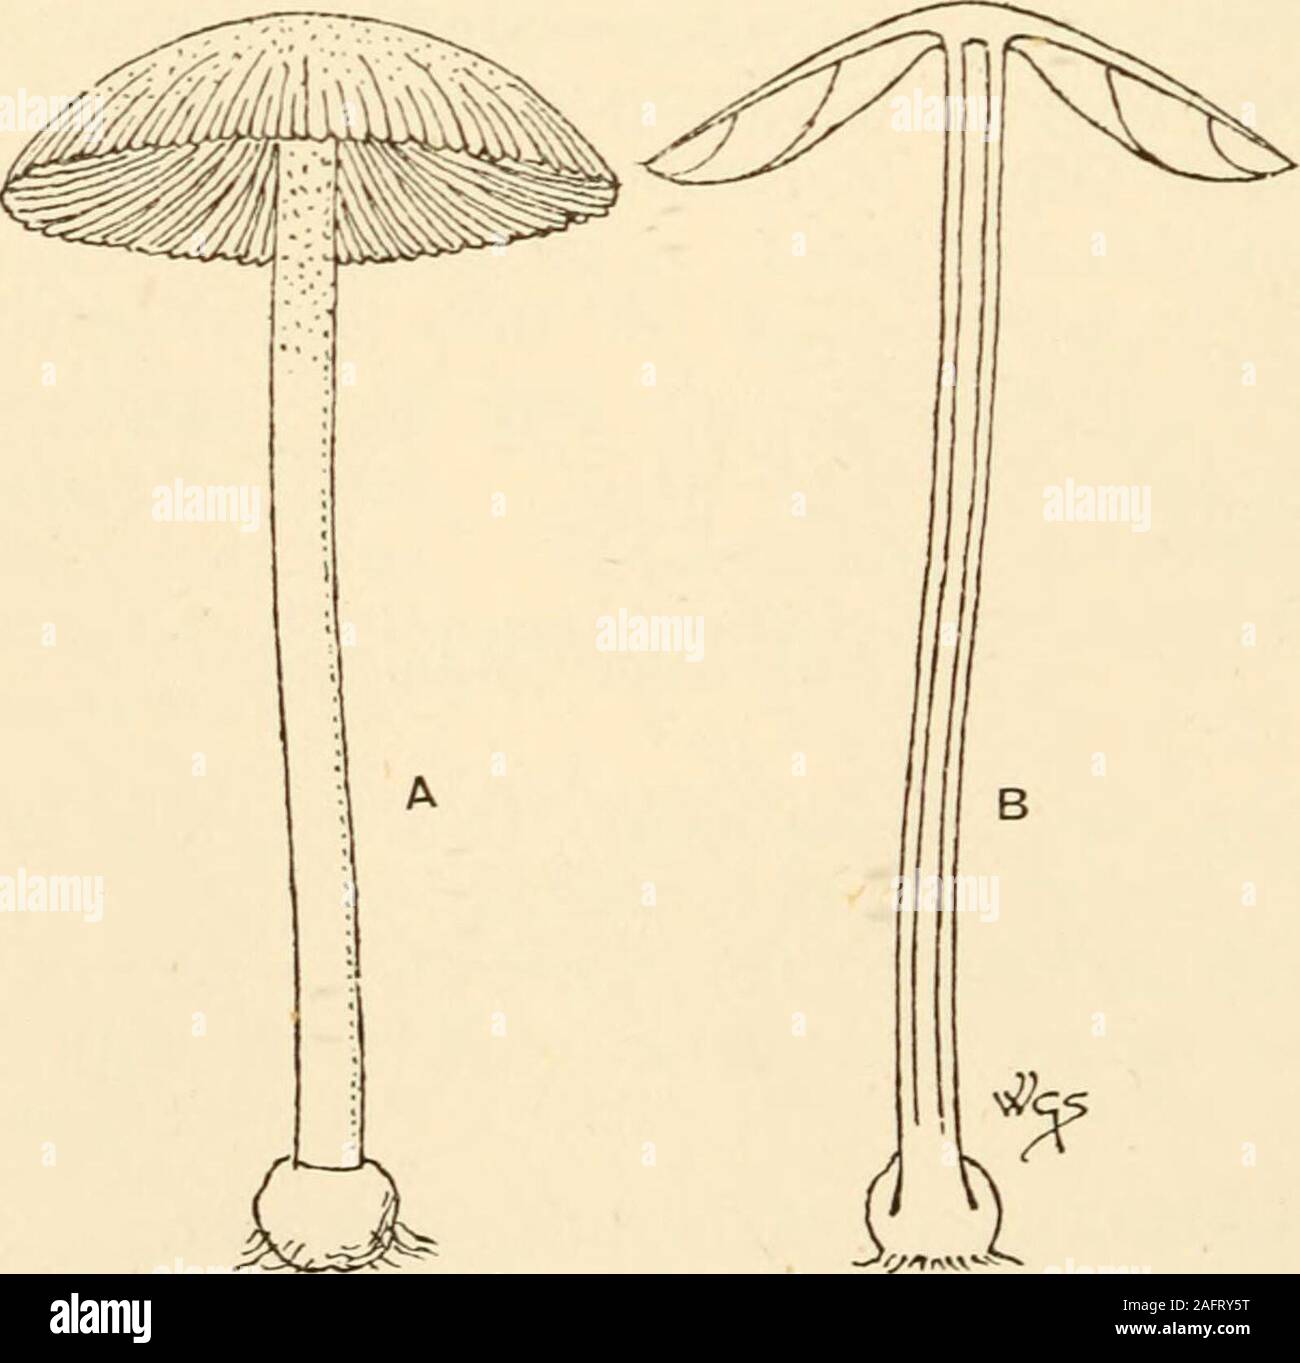 . Synopsis of the British Basidiomycetes ; a descriptive catalogue of the drawings and specimens in the Department of botany, British museum. (from its watery substance; depluo, to rain) a b c.P. resupinate, then reflexed, hygrophanous, rufescent-hoary. St. small, lateral, rarely central, or none, white villous. G. adnato-decurrent, rufescent.On the ground, amongst moss, sawdust, wood-ashes, sometimes in stoves ; rare. Oct. Diam. I in. 555. C. byssisedus Gill, (from the fibrils on the stem; byssus, fine linen thread, sedeo, to sit) a b c.P. resupinate, then horizontal and reniform, villous, pa Stock Photo